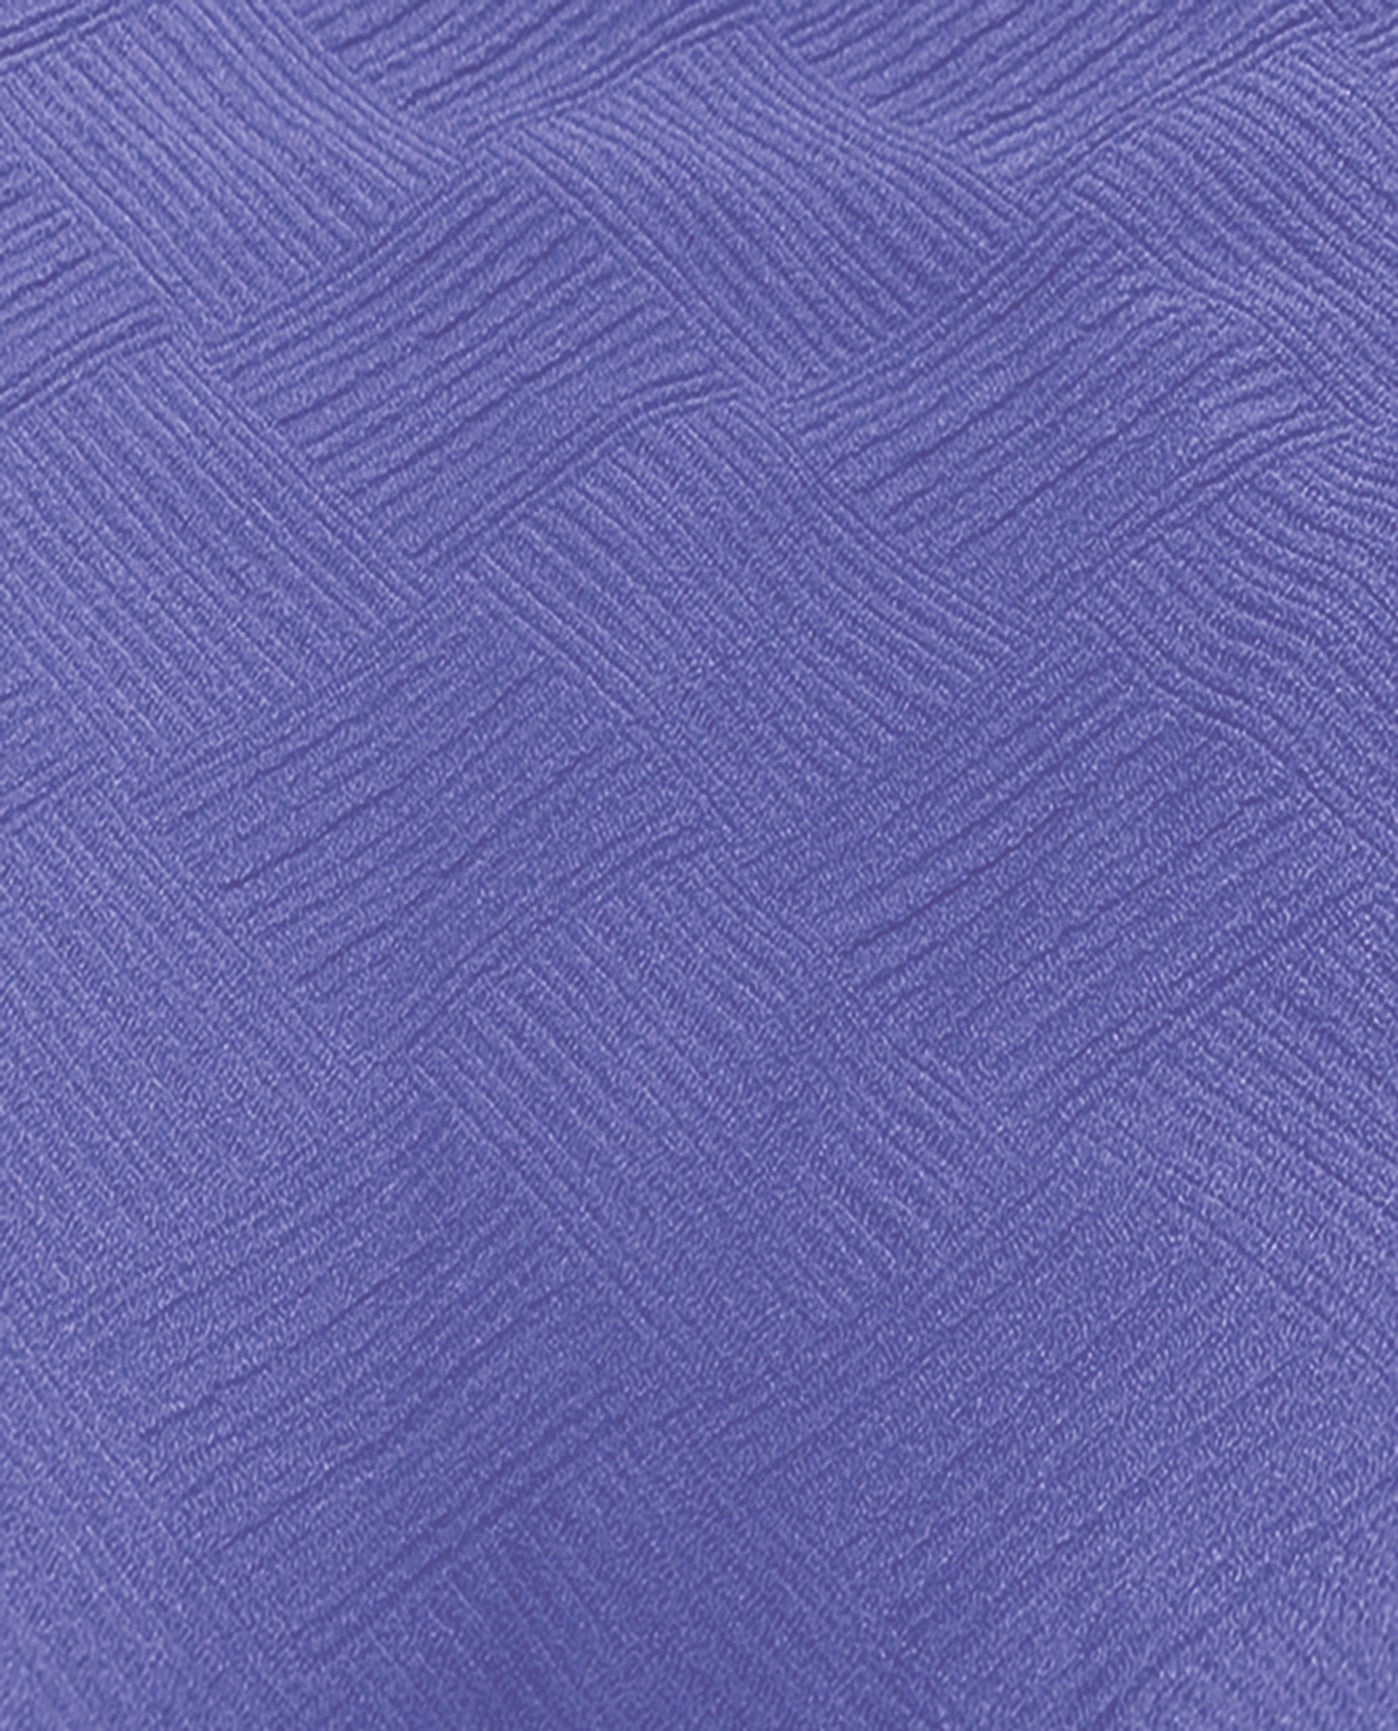 FABRIC SWATCH VIEW OF CHLORINE RESISTANT AQUAMORE SOLID SIGNATURE TEXTURED HIGH NECK ONE PIECE SWIMSUIT | 019 AQS SIGNATURE LILAC